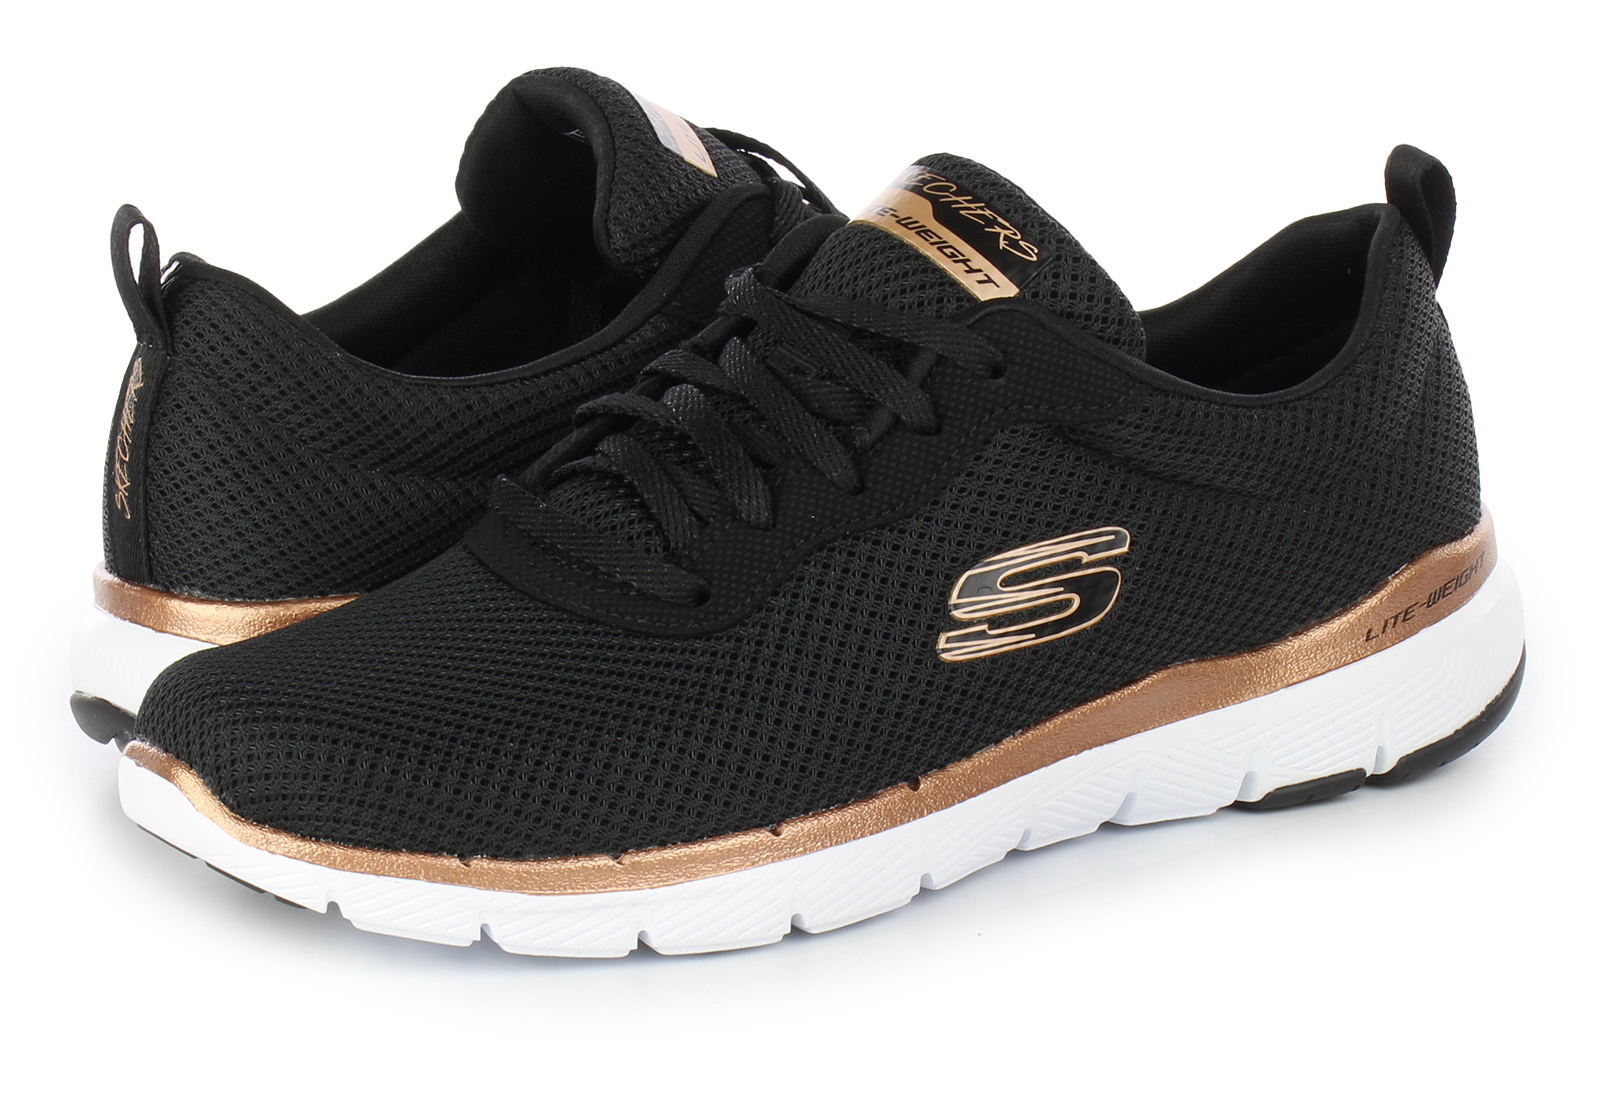 Skechers - Flex - First Insight - 13070-BKRG Online shop for sneakers, shoes and boots